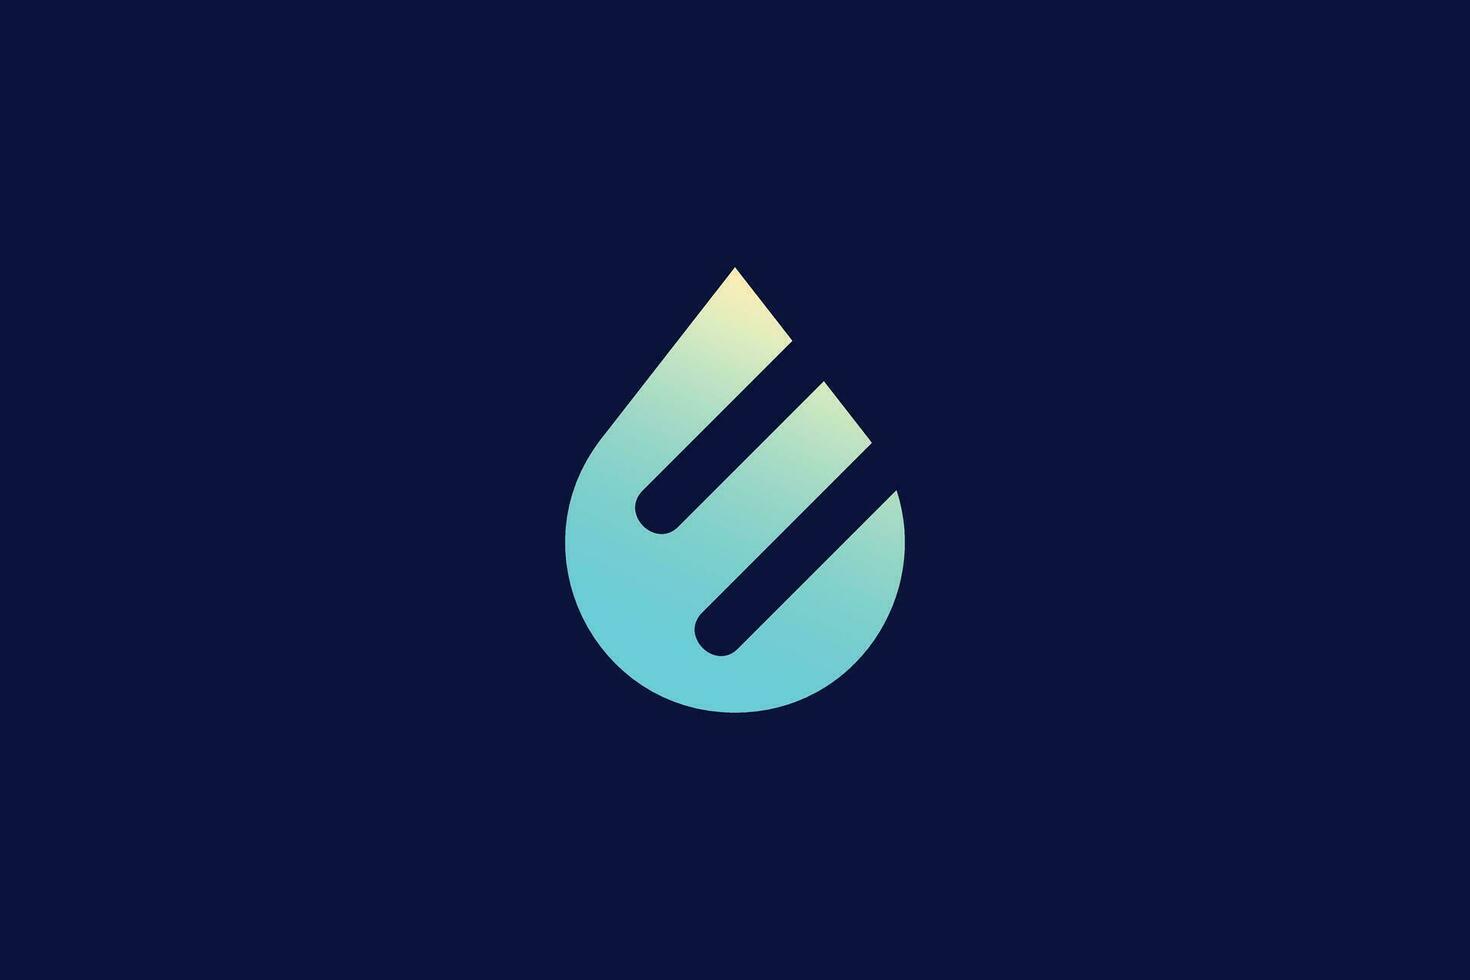 Creative and minimalist letter E water drop logo design template on black background vector